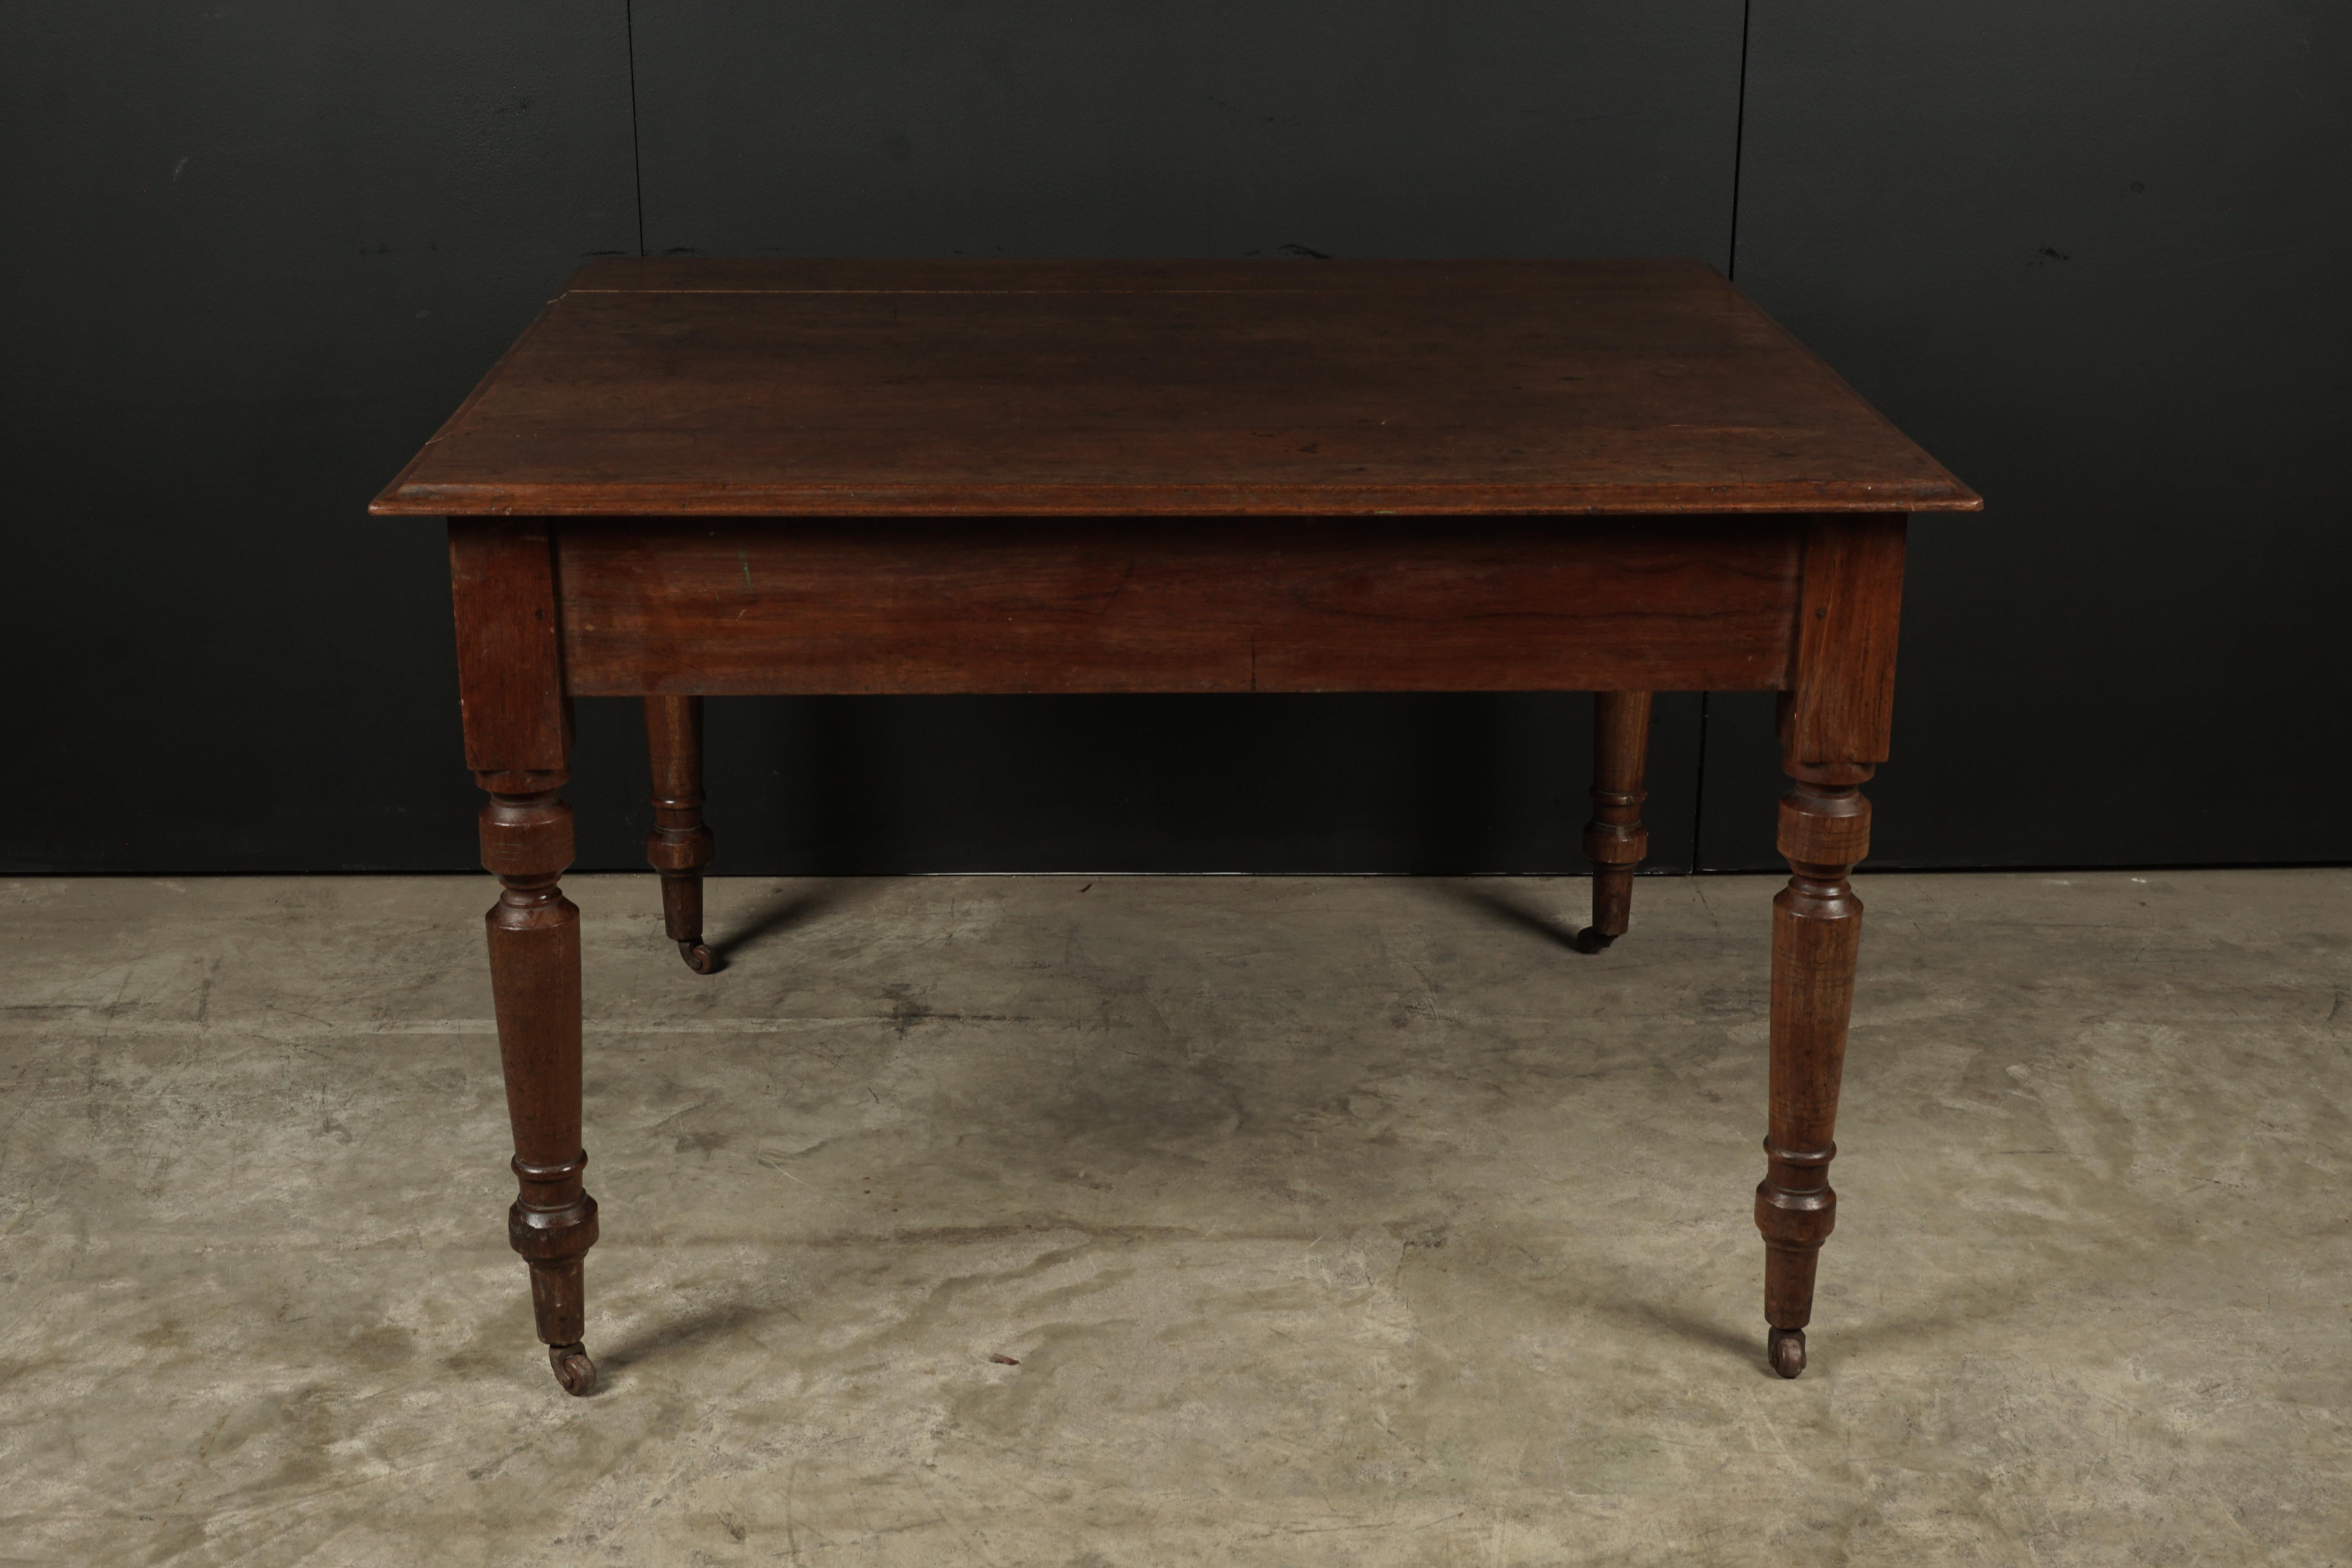 Solid oak dining table from France, circa 1920. Almost square shape with original castors on feet. Light patina and wear.